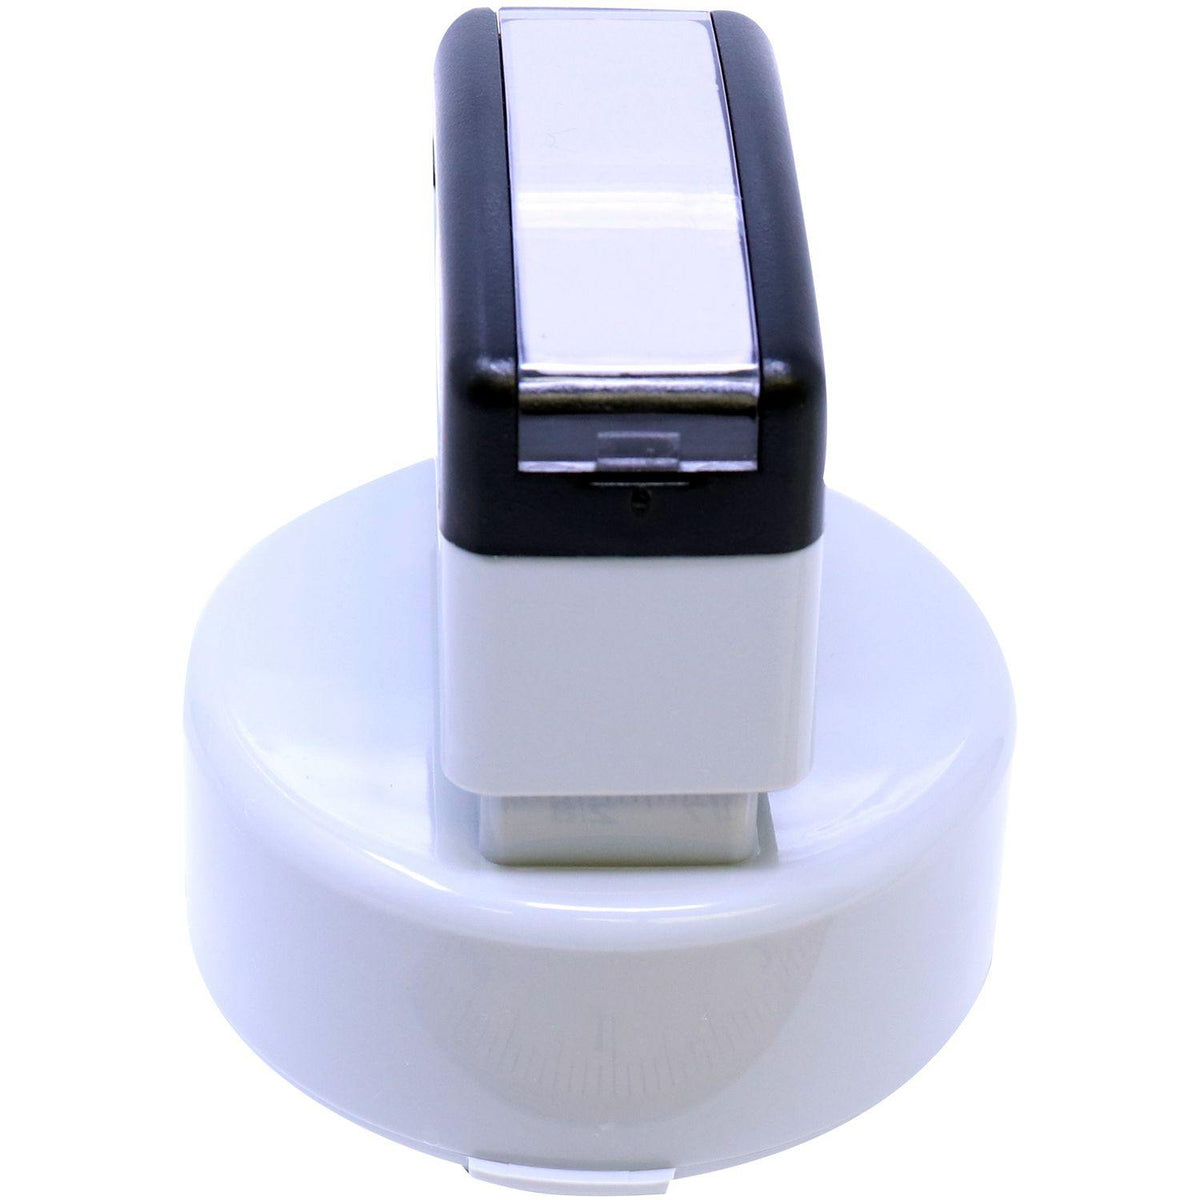 Professional MaxLight Pre Inked Rubber Stamp of Seal - Engineer Seal Stamps - Stamp Type_Pre-Inked, Type of Use_Professional